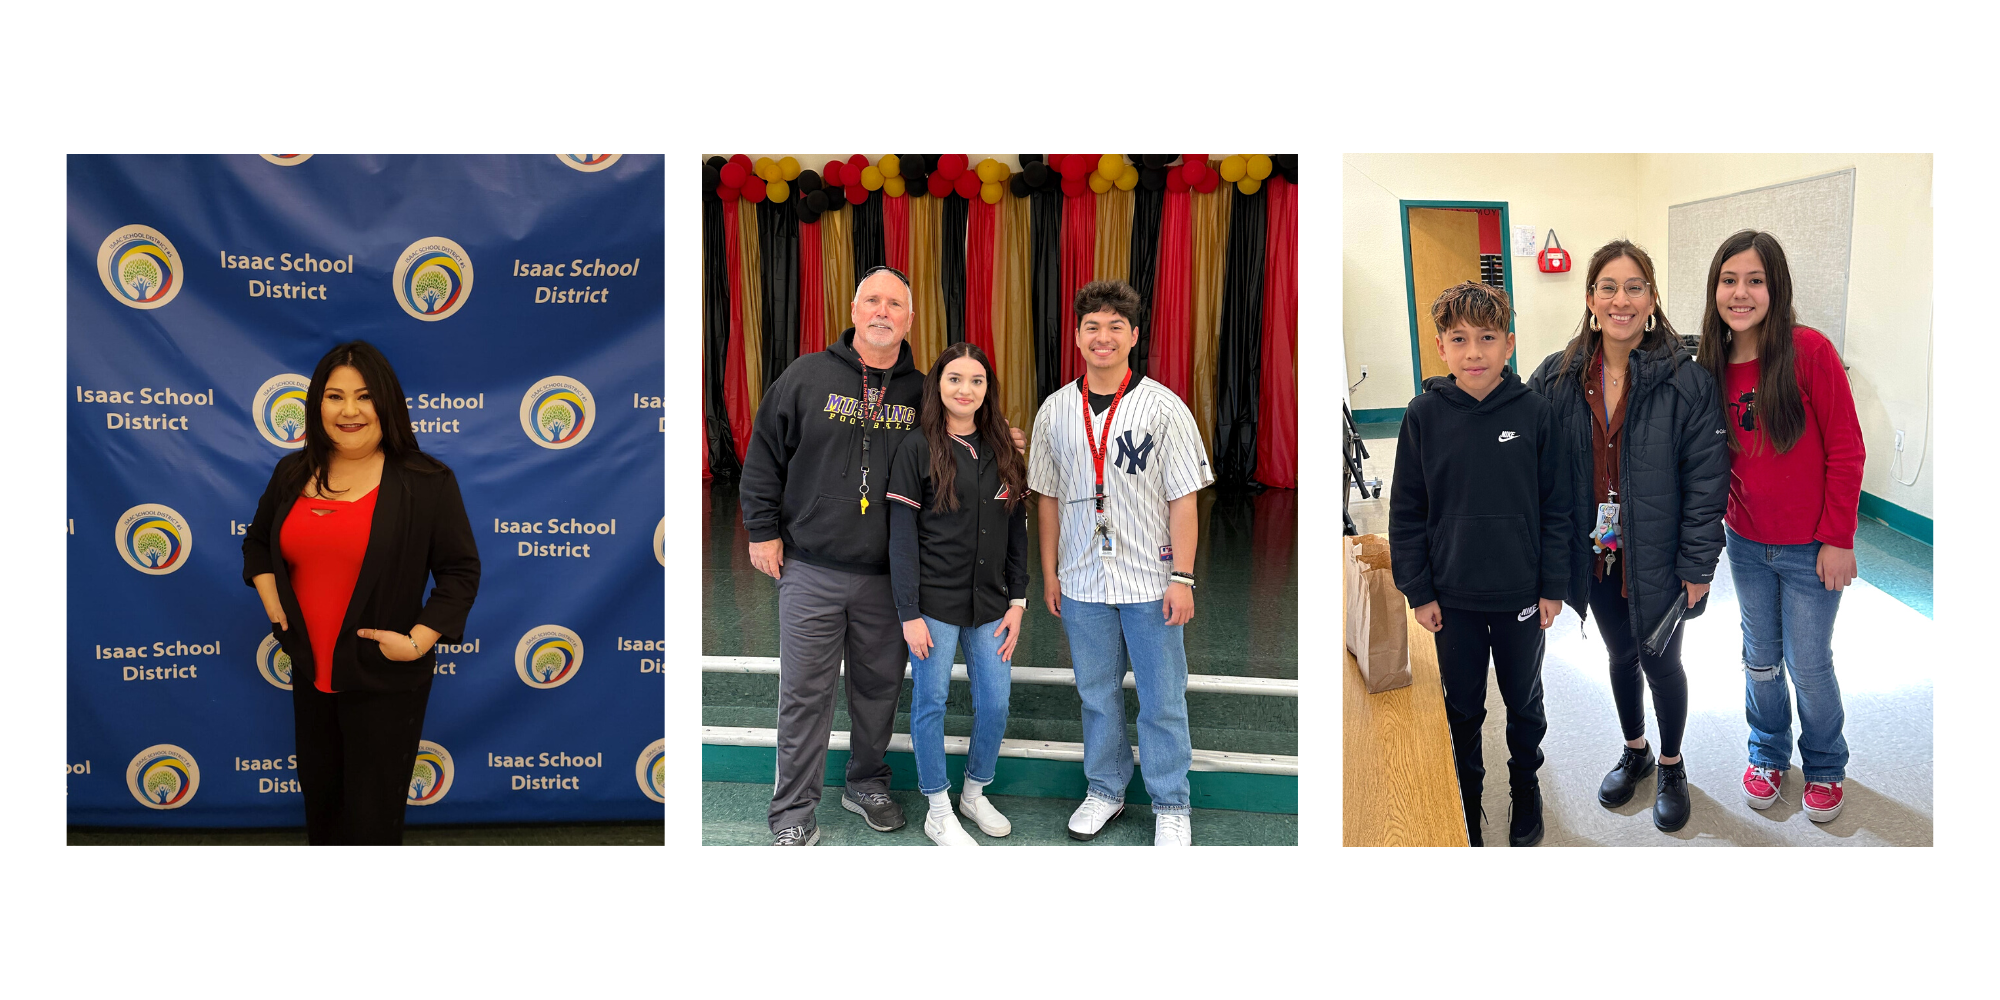 3 photos of the principal, and staff at school  events. 